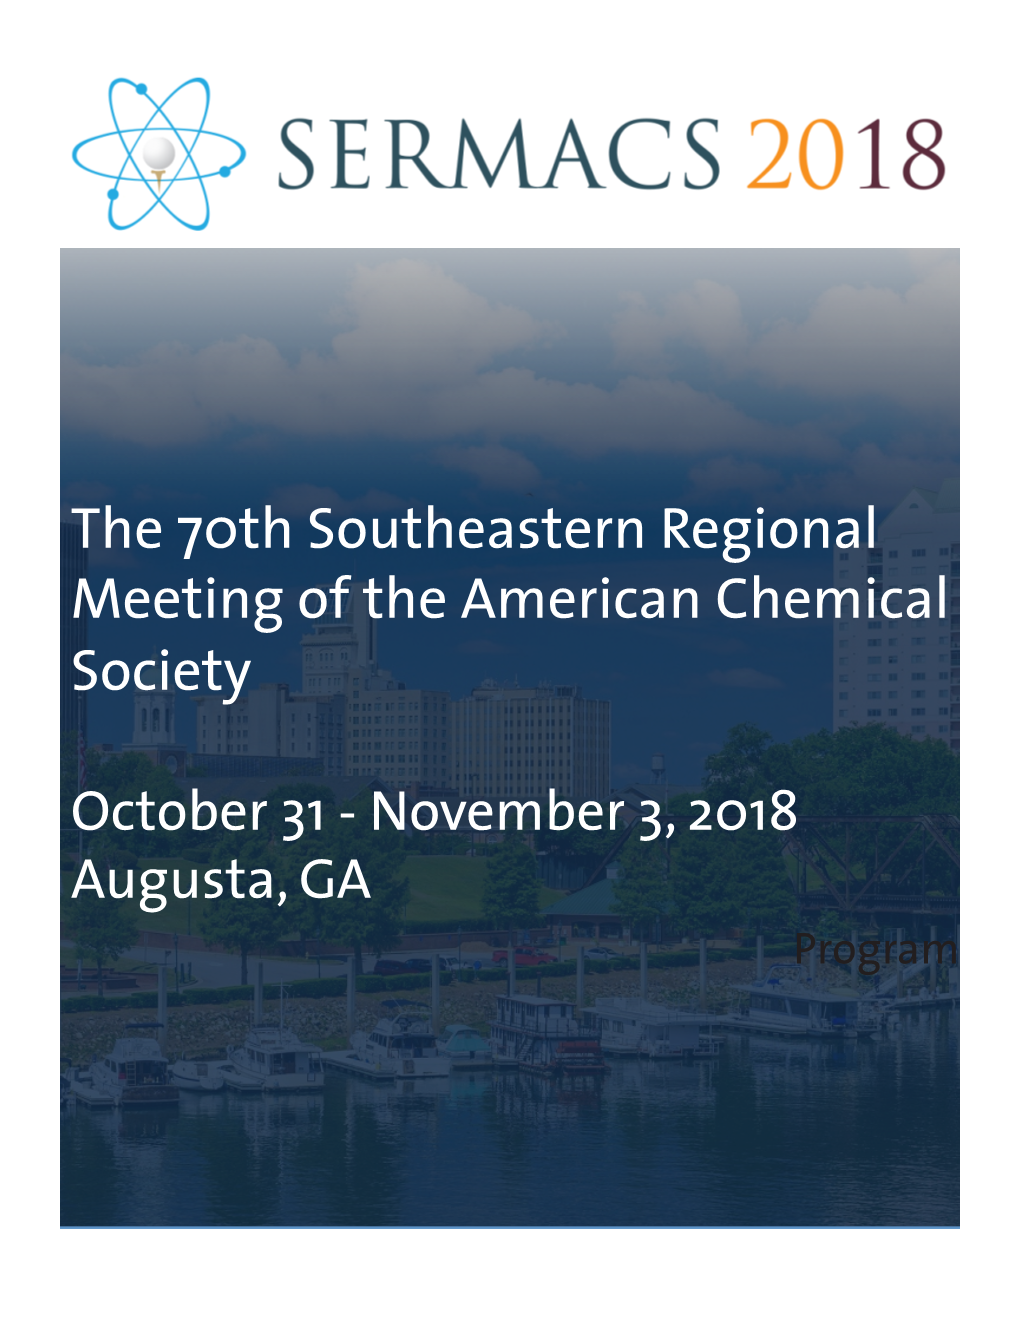 The 70Th Southeastern Regional Meeting of the American Chemical Society